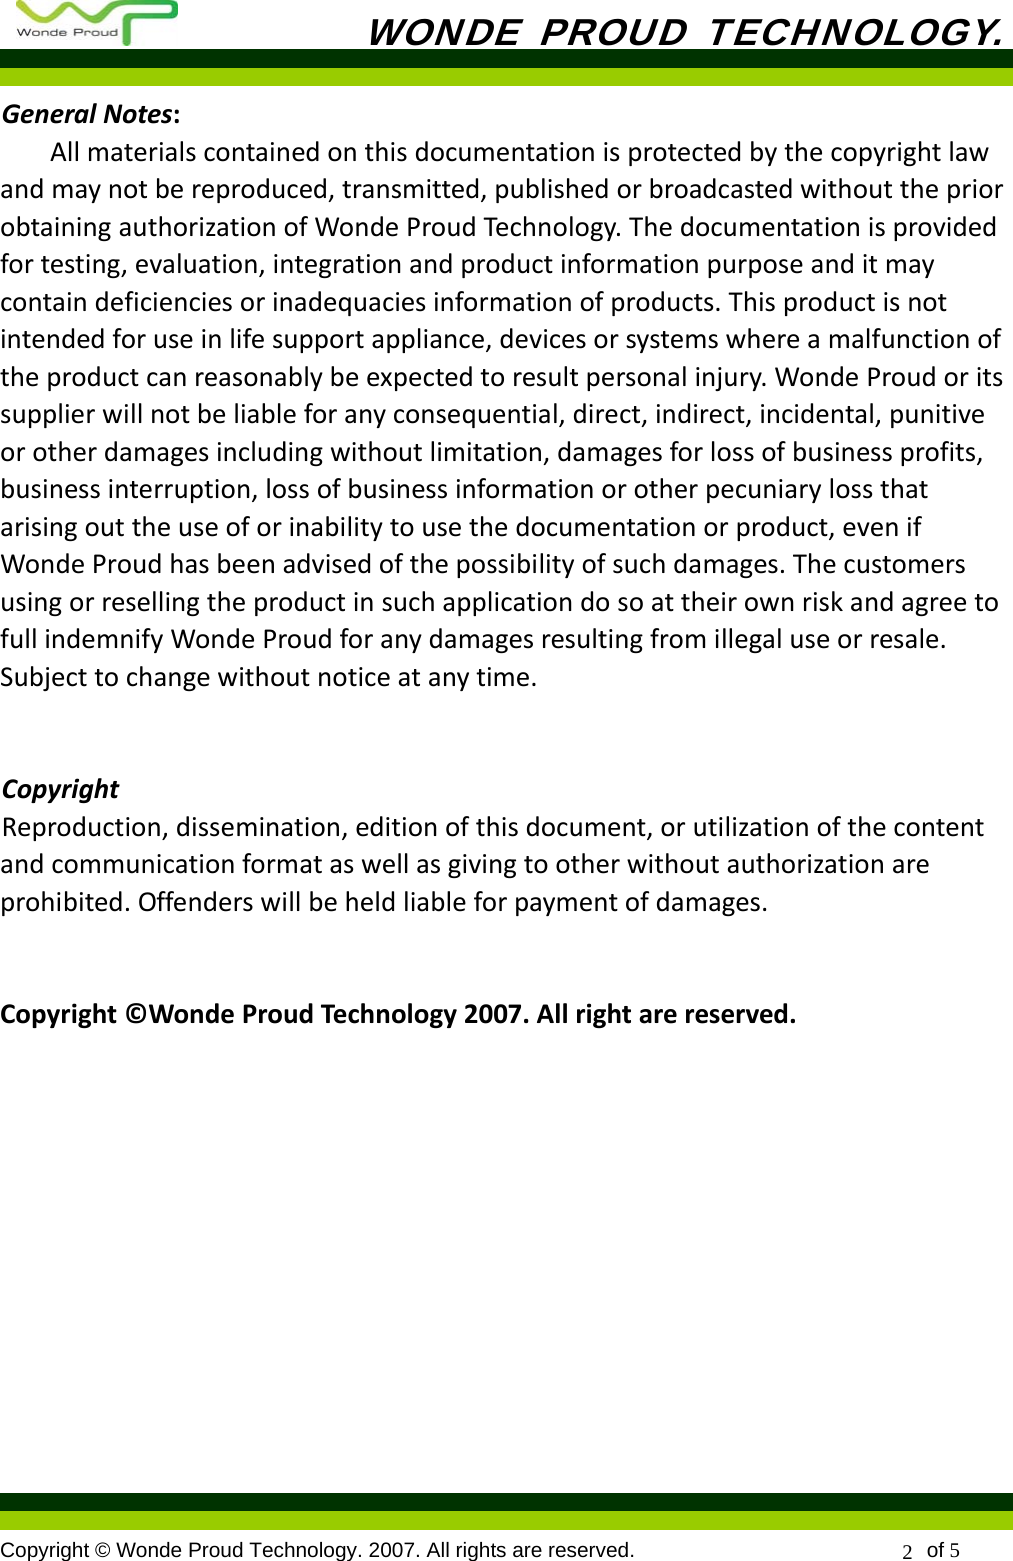           WONDE PROUD TECHNOLOGY.  Copyright © Wonde Proud Technology. 2007. All rights are reserved.                            of 5 2 GeneralNotes:Allmaterialscontainedonthisdocumentationisprotectedbythecopyrightlawandmaynotbereproduced,transmitted,publishedorbroadcastedwithoutthepriorobtainingauthorizationofWondeProudTechnology.Thedocumentationisprovidedfortesting,evaluation,integrationandproductinformationpurposeanditmaycontaindeficienciesorinadequaciesinformationofproducts.Thisproductisnotintendedforuseinlifesupportappliance,devicesorsystemswhereamalfunctionoftheproductcanreasonablybeexpectedtoresultpersonalinjury.WondeProudoritssupplierwillnotbeliableforanyconsequential,direct,indirect,incidental,punitiveorotherdamagesincludingwithoutlimitation,damagesforlossofbusinessprofits,businessinterruption,lossofbusinessinformationorotherpecuniarylossthatarisingouttheuseoforinabilitytousethedocumentationorproduct,evenifWondeProudhasbeenadvisedofthepossibilityofsuchdamages.ThecustomersusingorresellingtheproductinsuchapplicationdosoattheirownriskandagreetofullindemnifyWondeProudforanydamagesresultingfromillegaluseorresale.Subjecttochangewithoutnoticeatanytime.CopyrightReproduction,dissemination,editionofthisdocument,orutilizationofthecontentandcommunicationformataswellasgivingtootherwithoutauthorizationareprohibited.Offenderswillbeheldliableforpaymentofdamages.Copyright©WondeProudTechnology2007.Allrightarereserved.